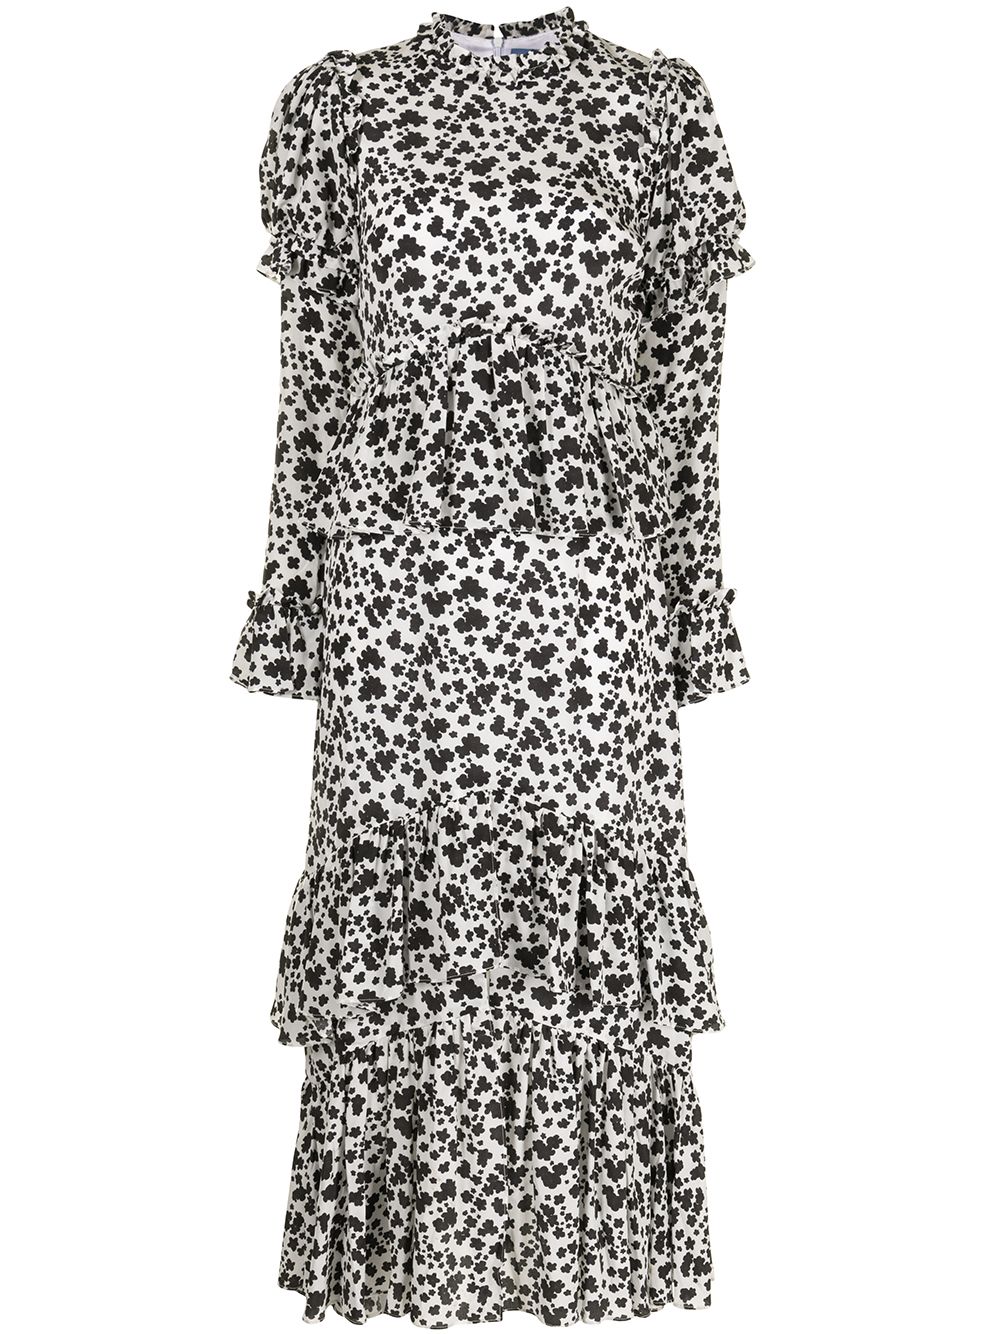 Image 1 of Macgraw Parterre blossom print dress